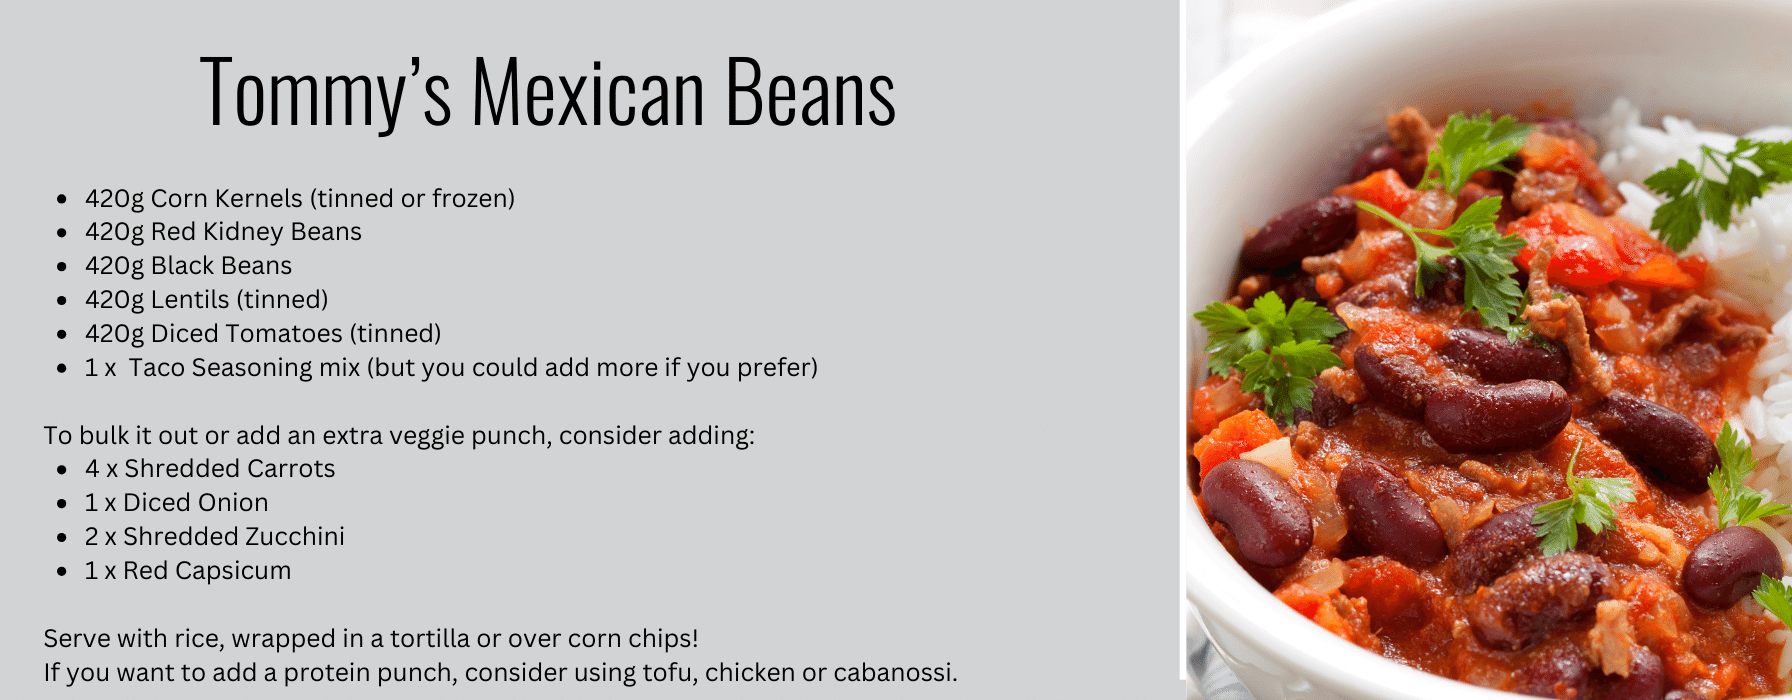 This image gives a recipe for Tommy's Mexican Beans. The ingredients for this recipe are:420g Corn Kernels (tinned or frozen)
420g Red Kidney Beans
420g Black Beans
420g Lentils (tinned)
420g Diced Tomatoes (tinned)
1 x  Taco Seasoning mix (but you could add more if you prefer)

To bulk it out or add an extra veggie punch, consider adding:
4 x Shredded Carrots
1 x Diced Onion
2 x Shredded Zucchini
1 x Red Capsicum

Serve with rice, wrapped in a tortilla or over corn chips!
If you want to add a protein punch, consider using tofu, chicken or cabanossi.